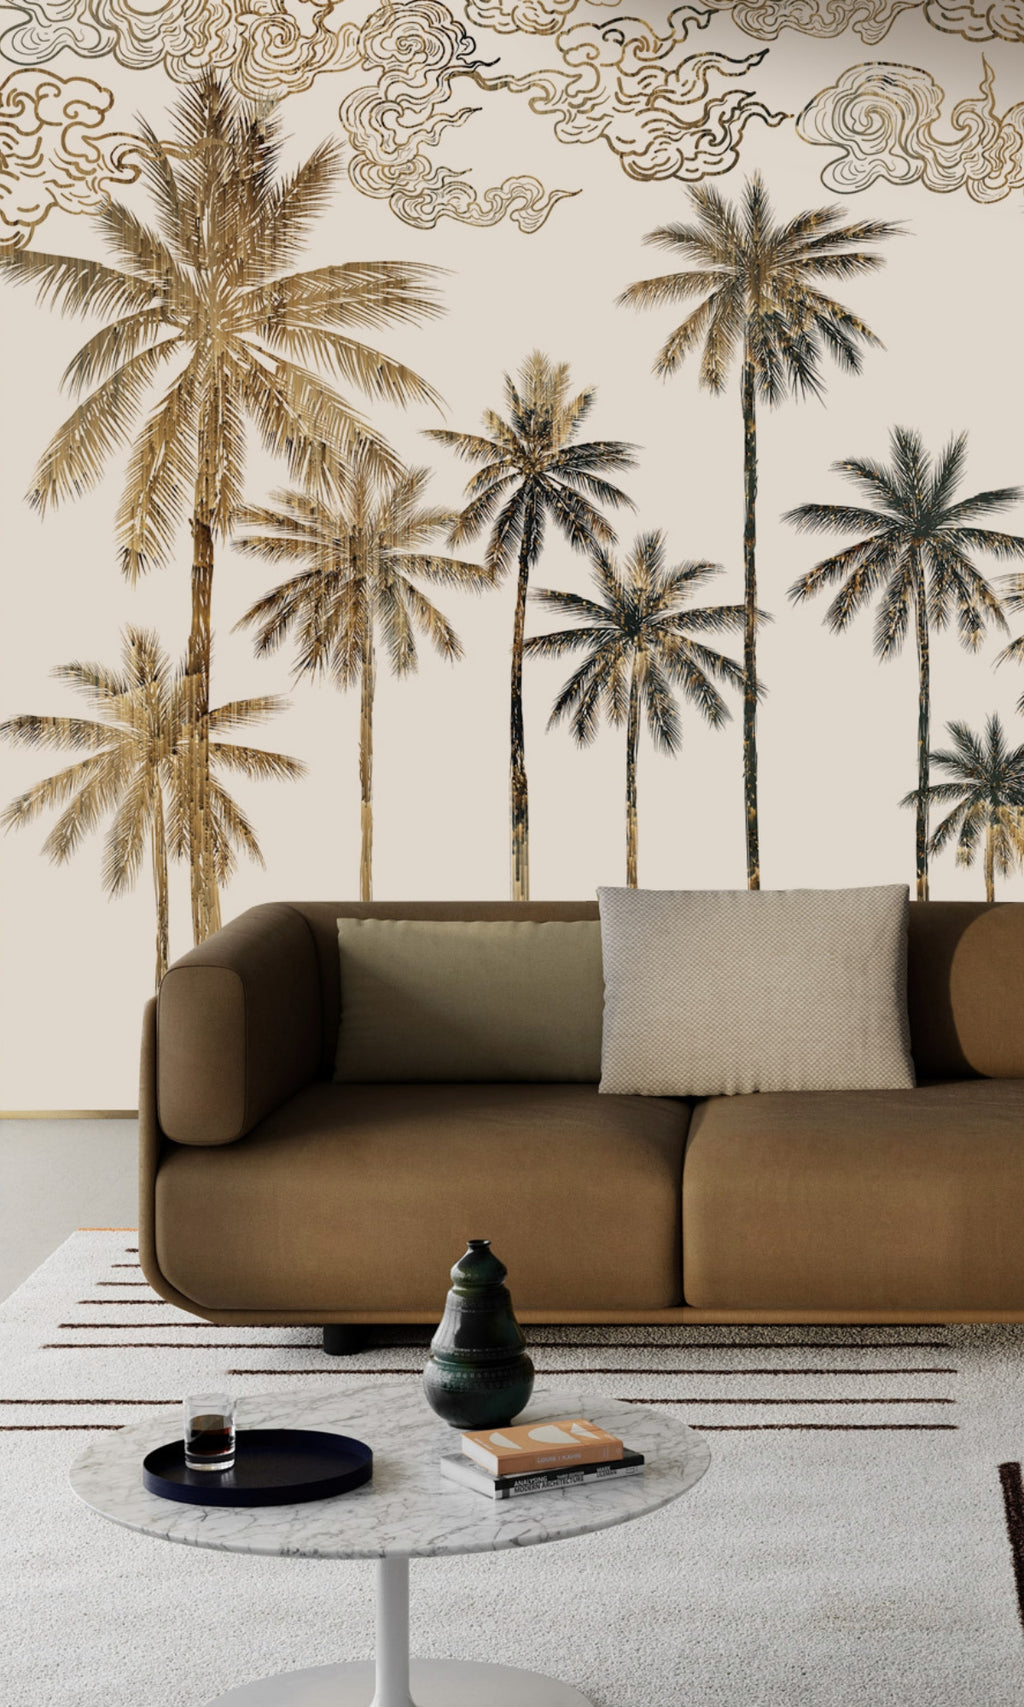 Jungle Palm Leaves Wallpaper Murals Tropical Leaves Wall Mural 3D Printed  Wall Art Decals Photo Wall  Leaf wallpaper Mural wallpaper Decal wall art